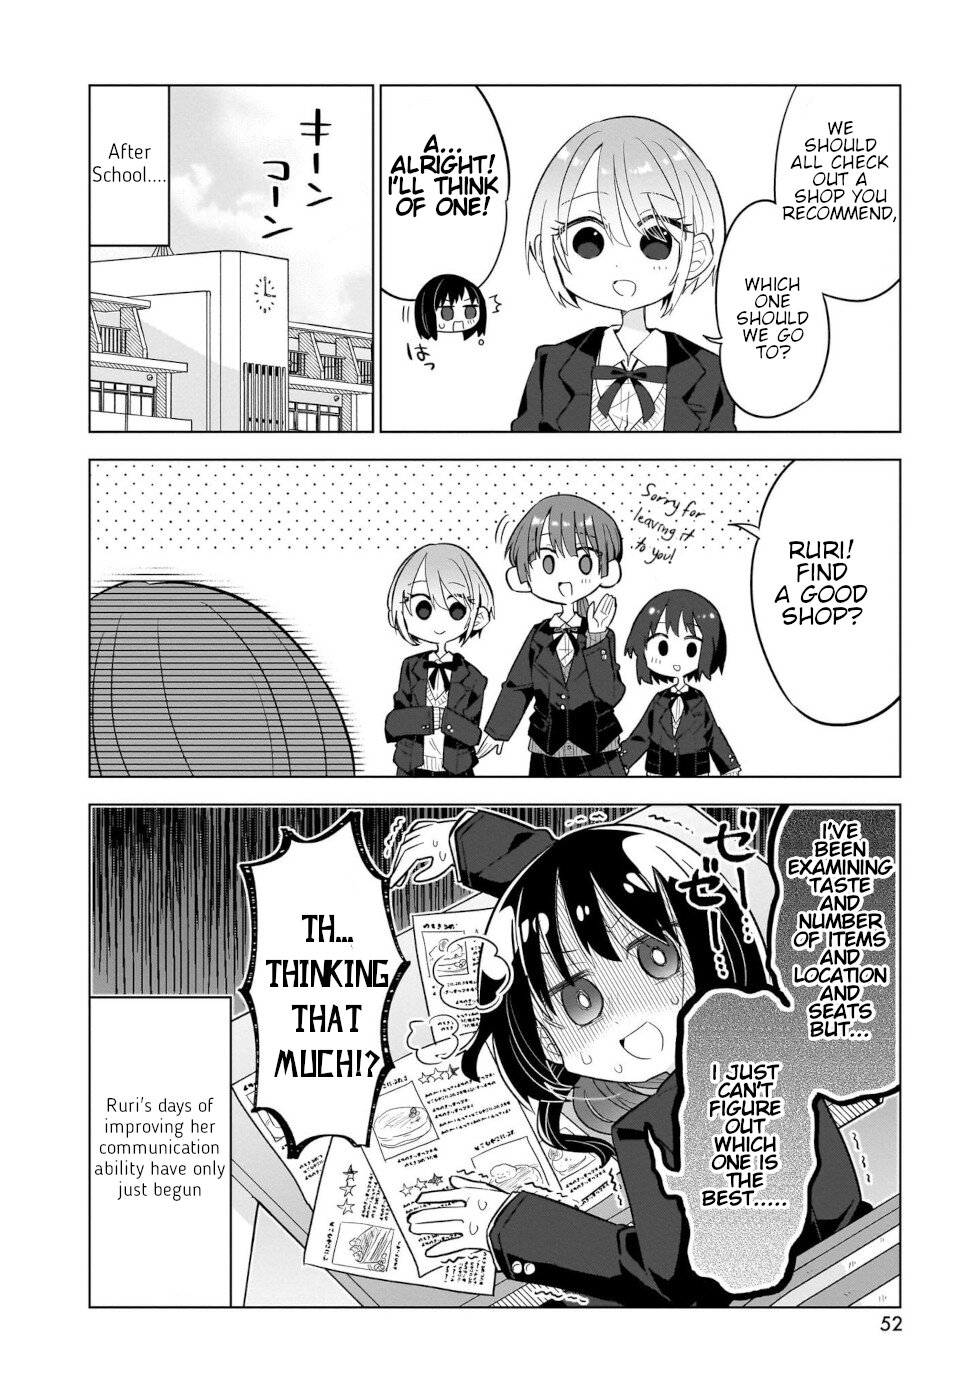 Sweets, Elf, And A High School Girl - chapter 7.5 - #2